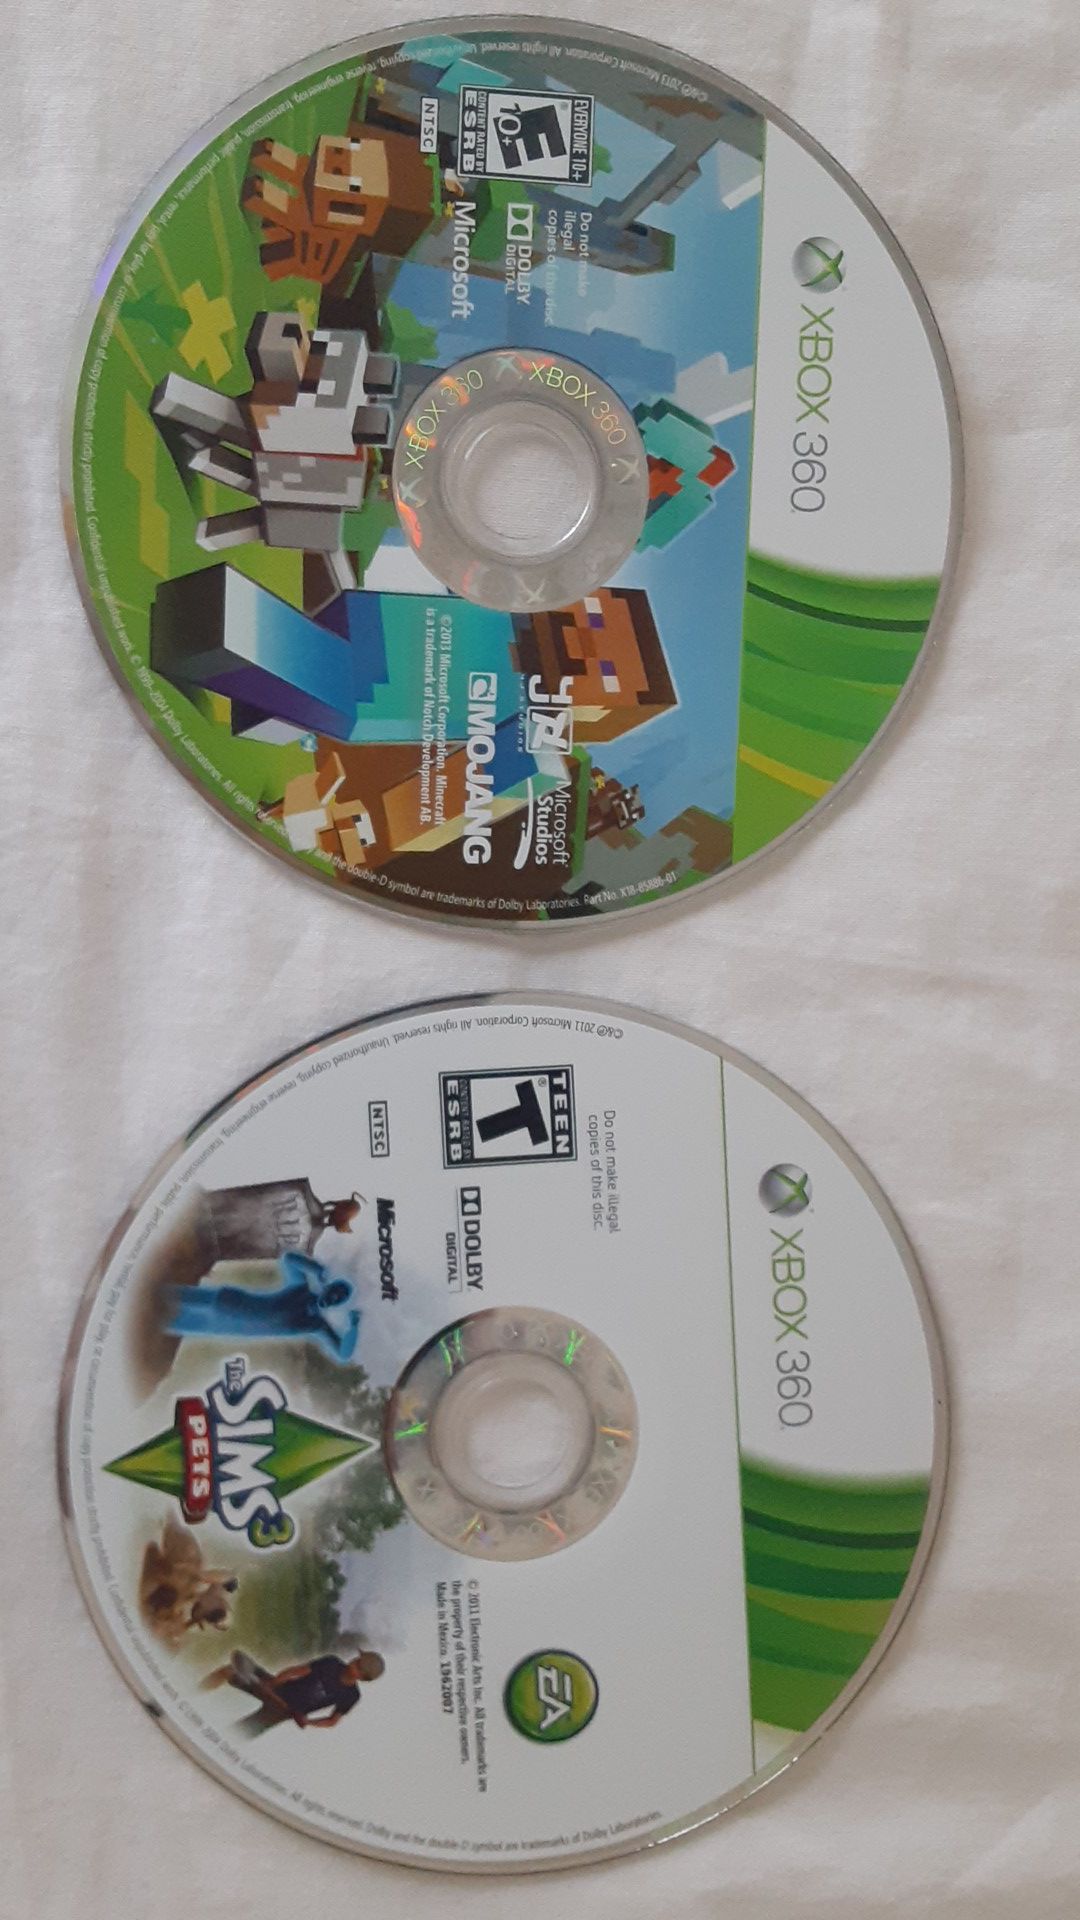 Minecraft and sims 3 xbox one or 360 games